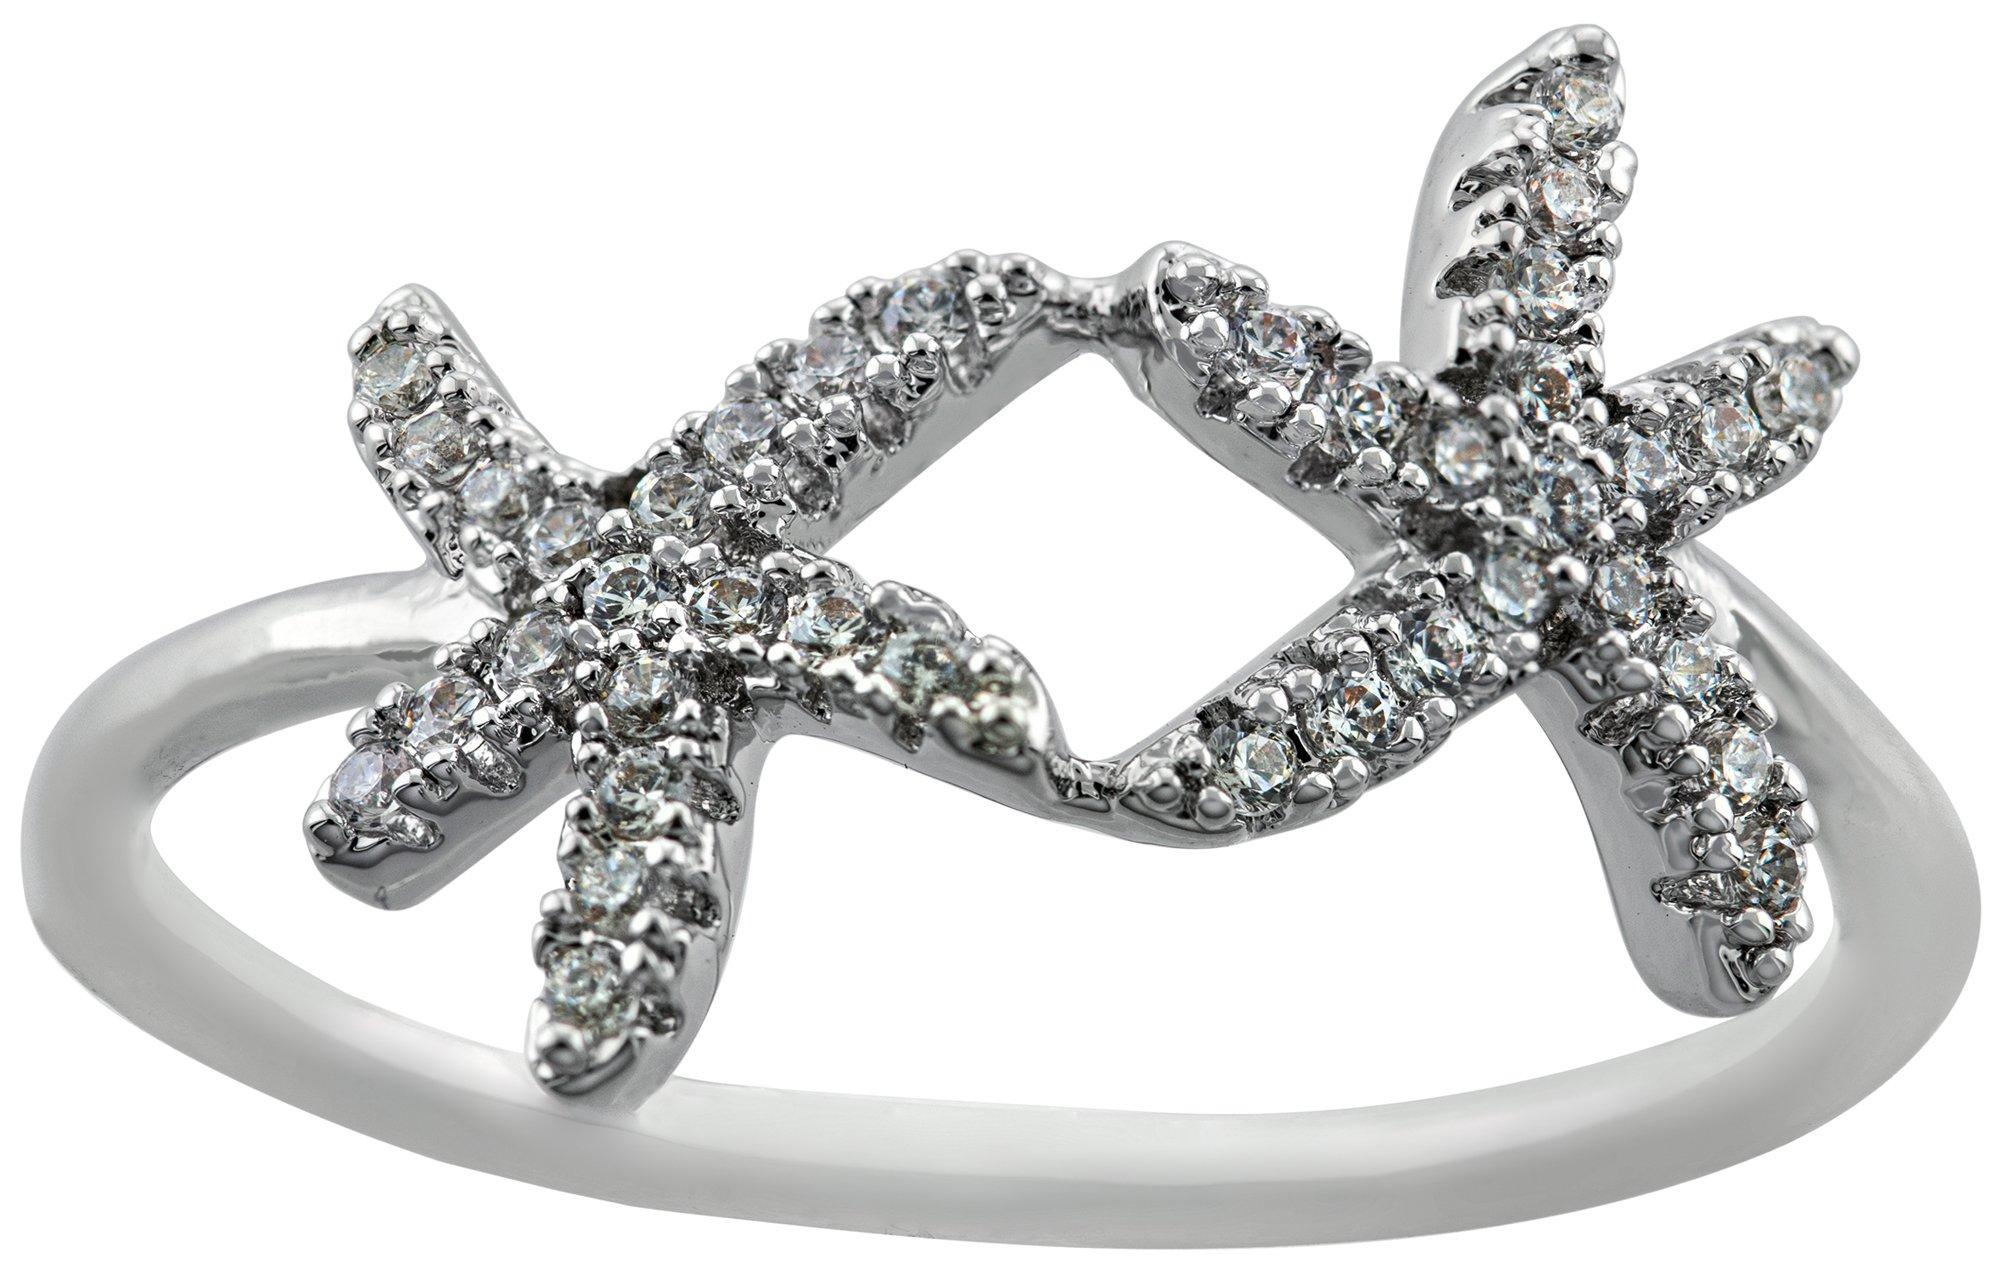 Ocean Treasures Double Pave Starfish Silver-Plate Boxed Ring